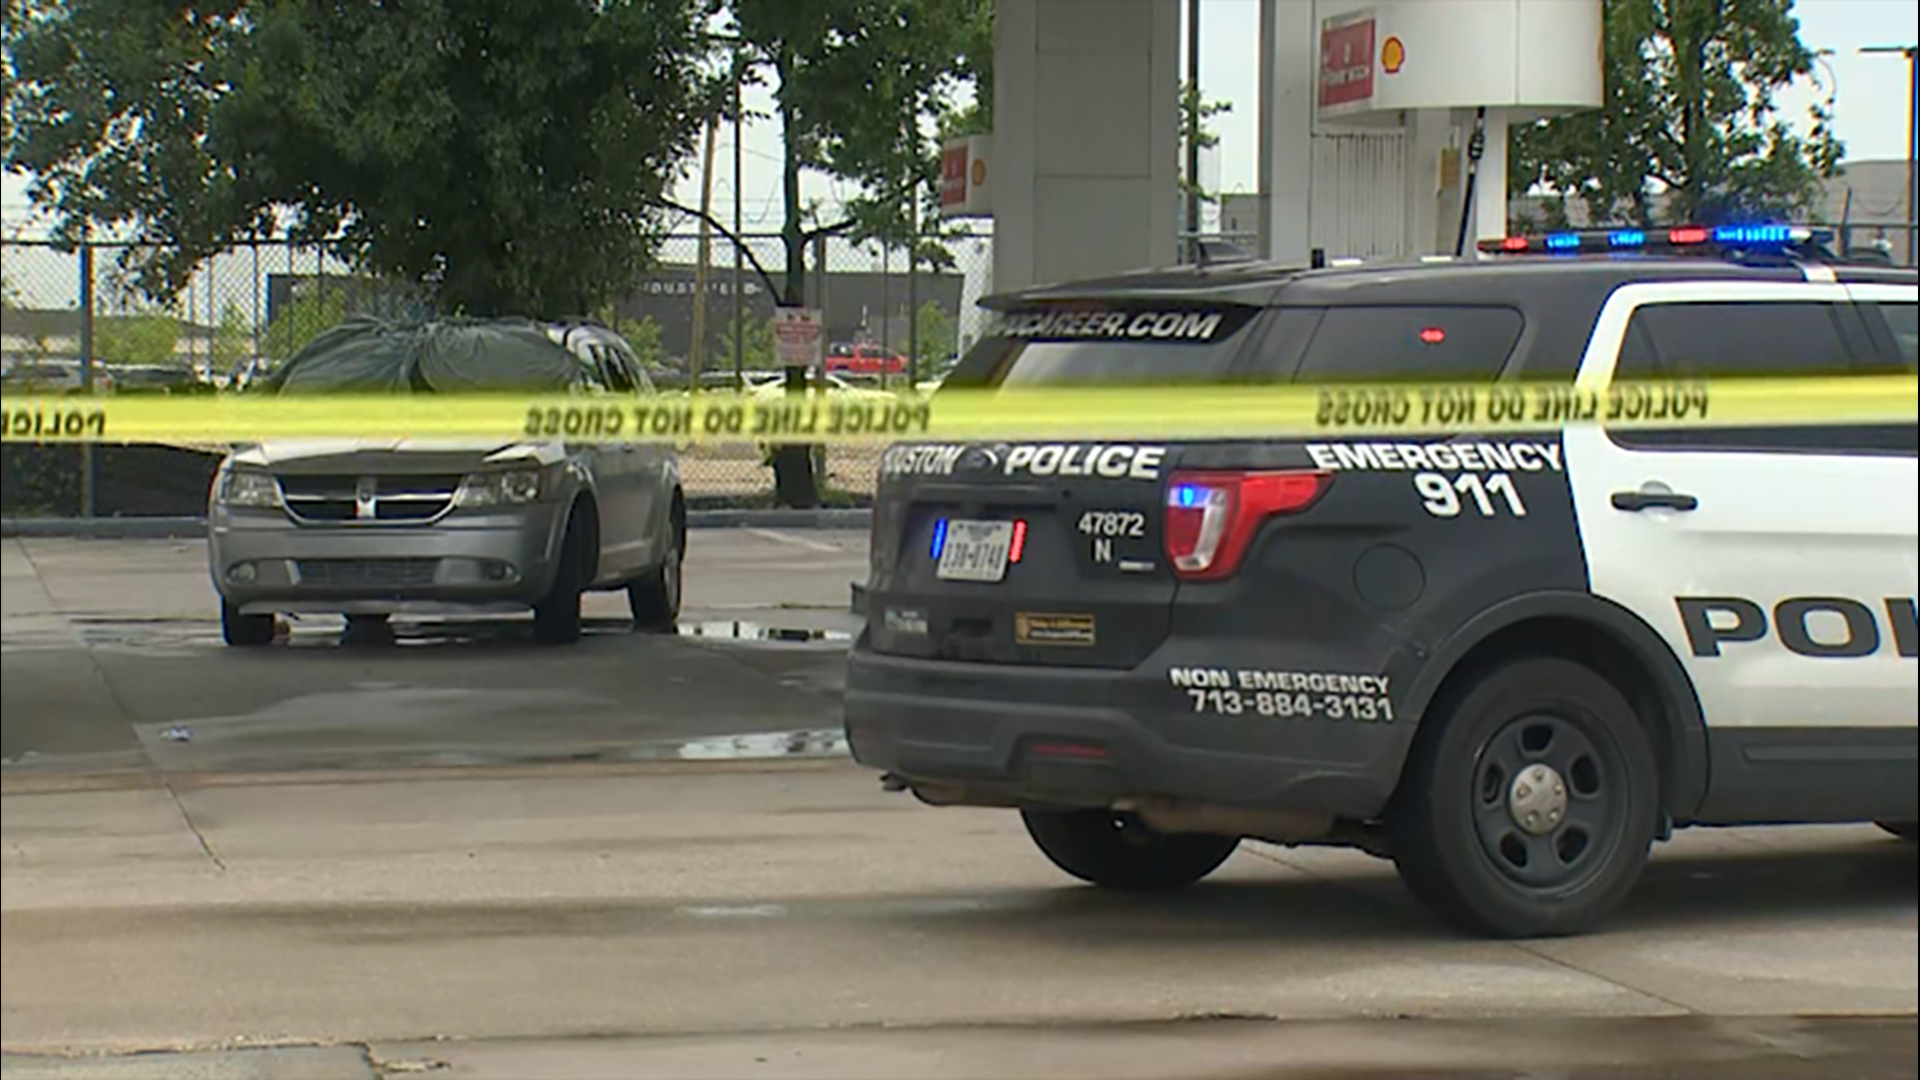 Police said the victim was found dead in the passenger seat of a van at a gas station in the 9300 block of the North Freeway.